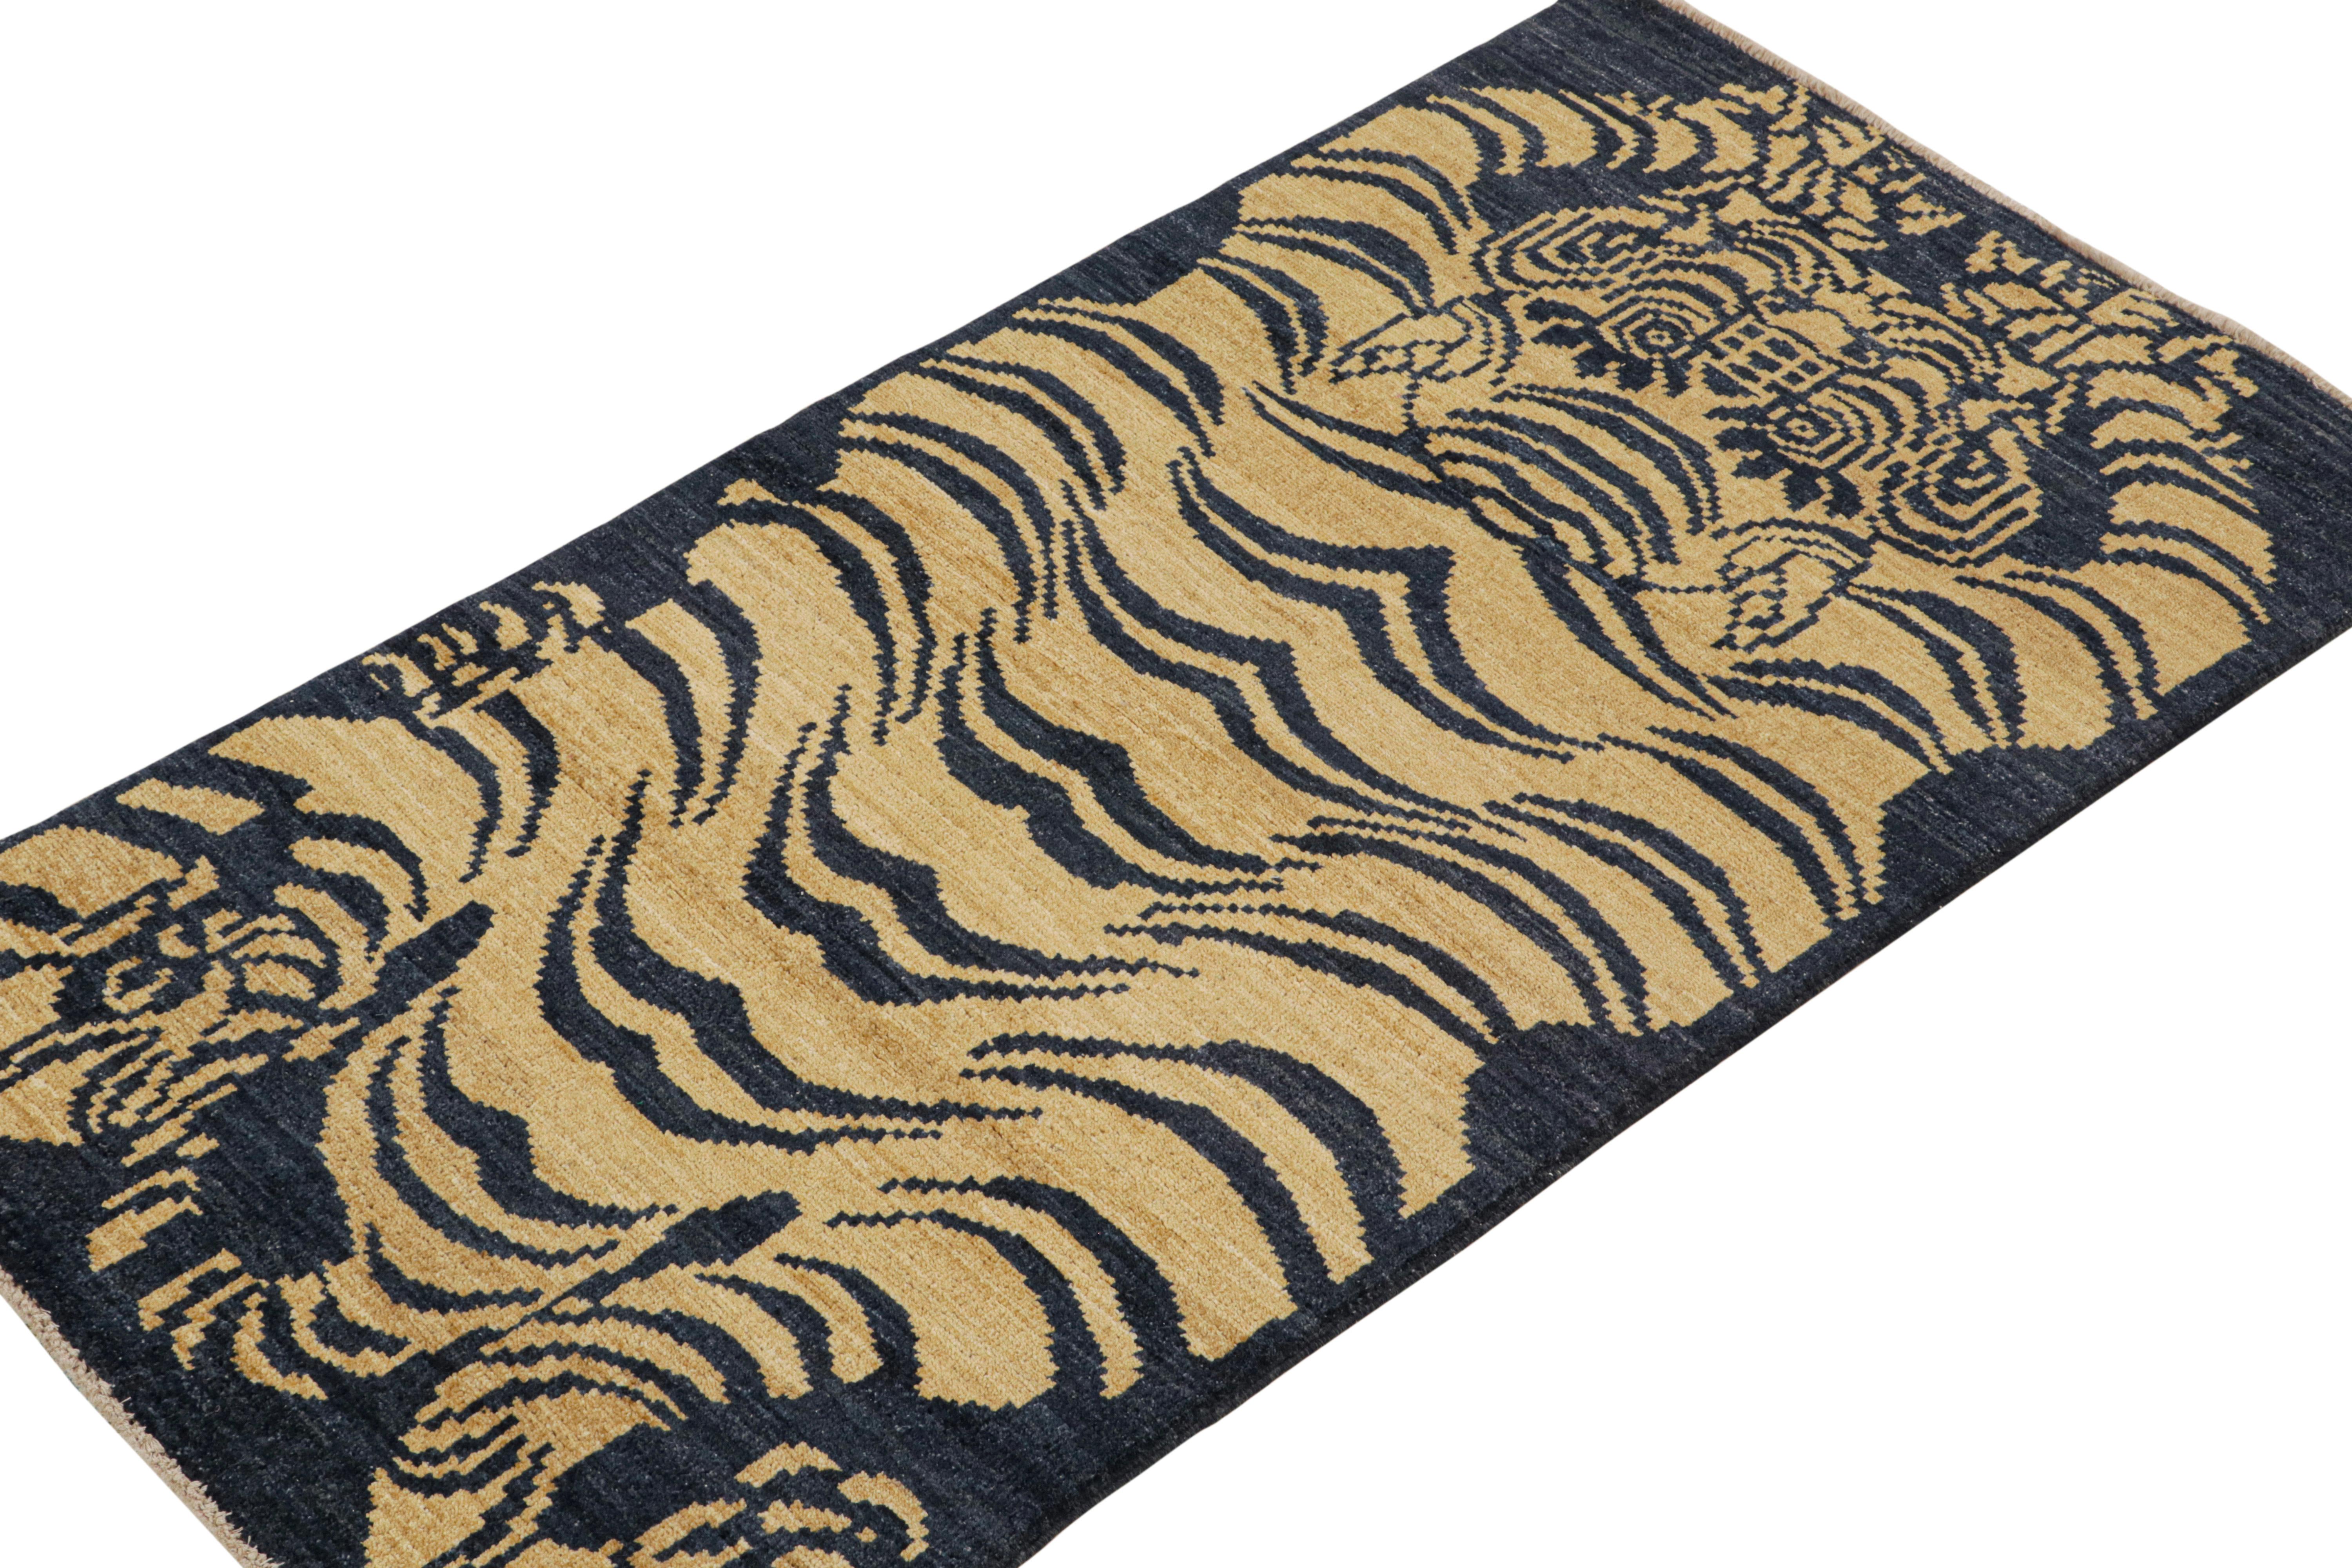 Pakistanais Tapis & Kilim's Classic Style Tiger Runner in Navy Blue and Gold Pictorial (en anglais) en vente